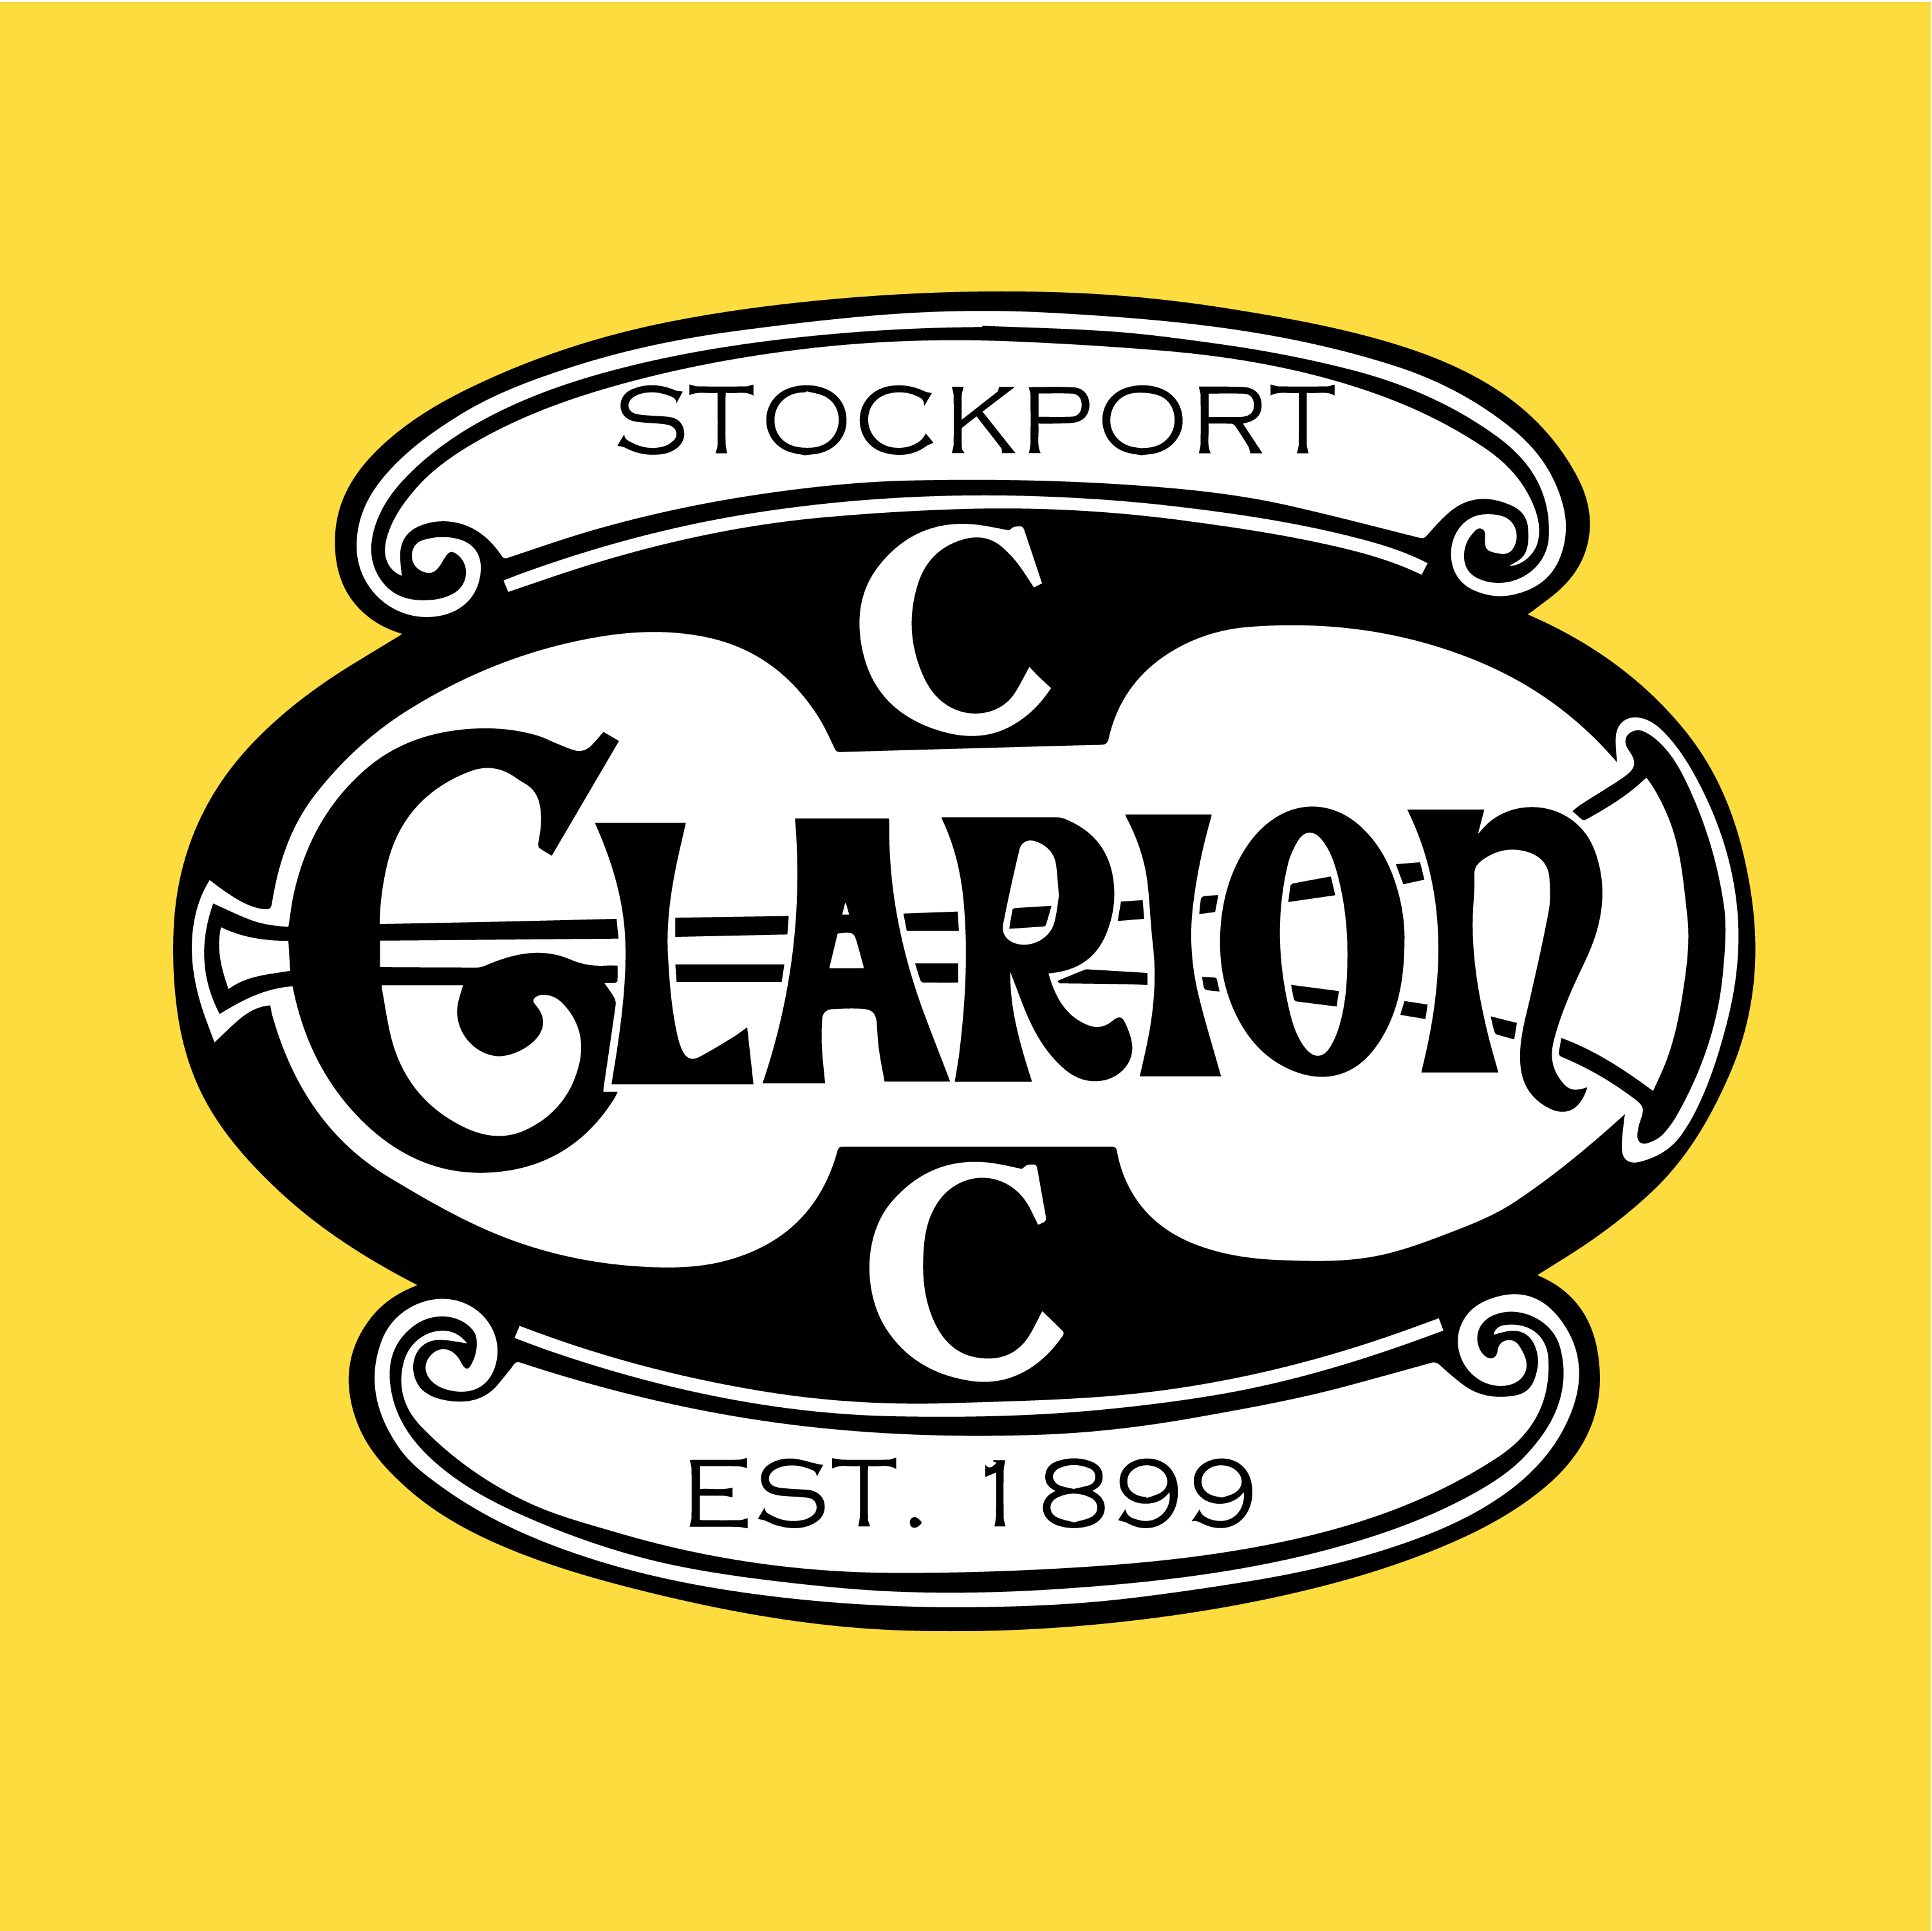 Club Image for STOCKPORT CLARION